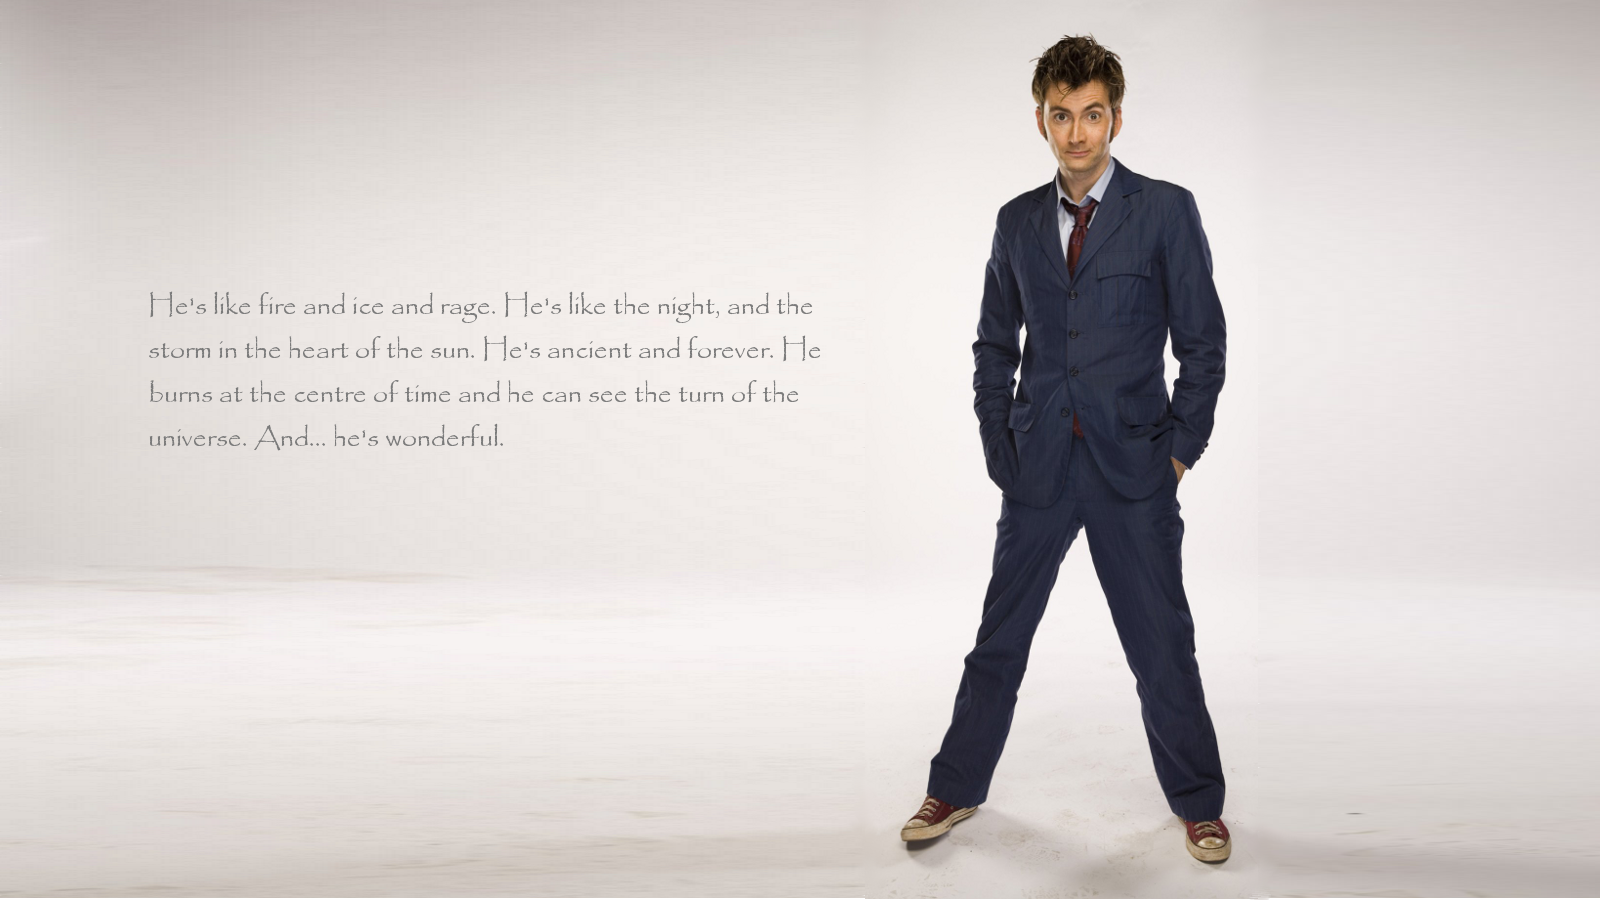 Tenth doctor p k k hd wallpapers backgrounds free download rare gallery